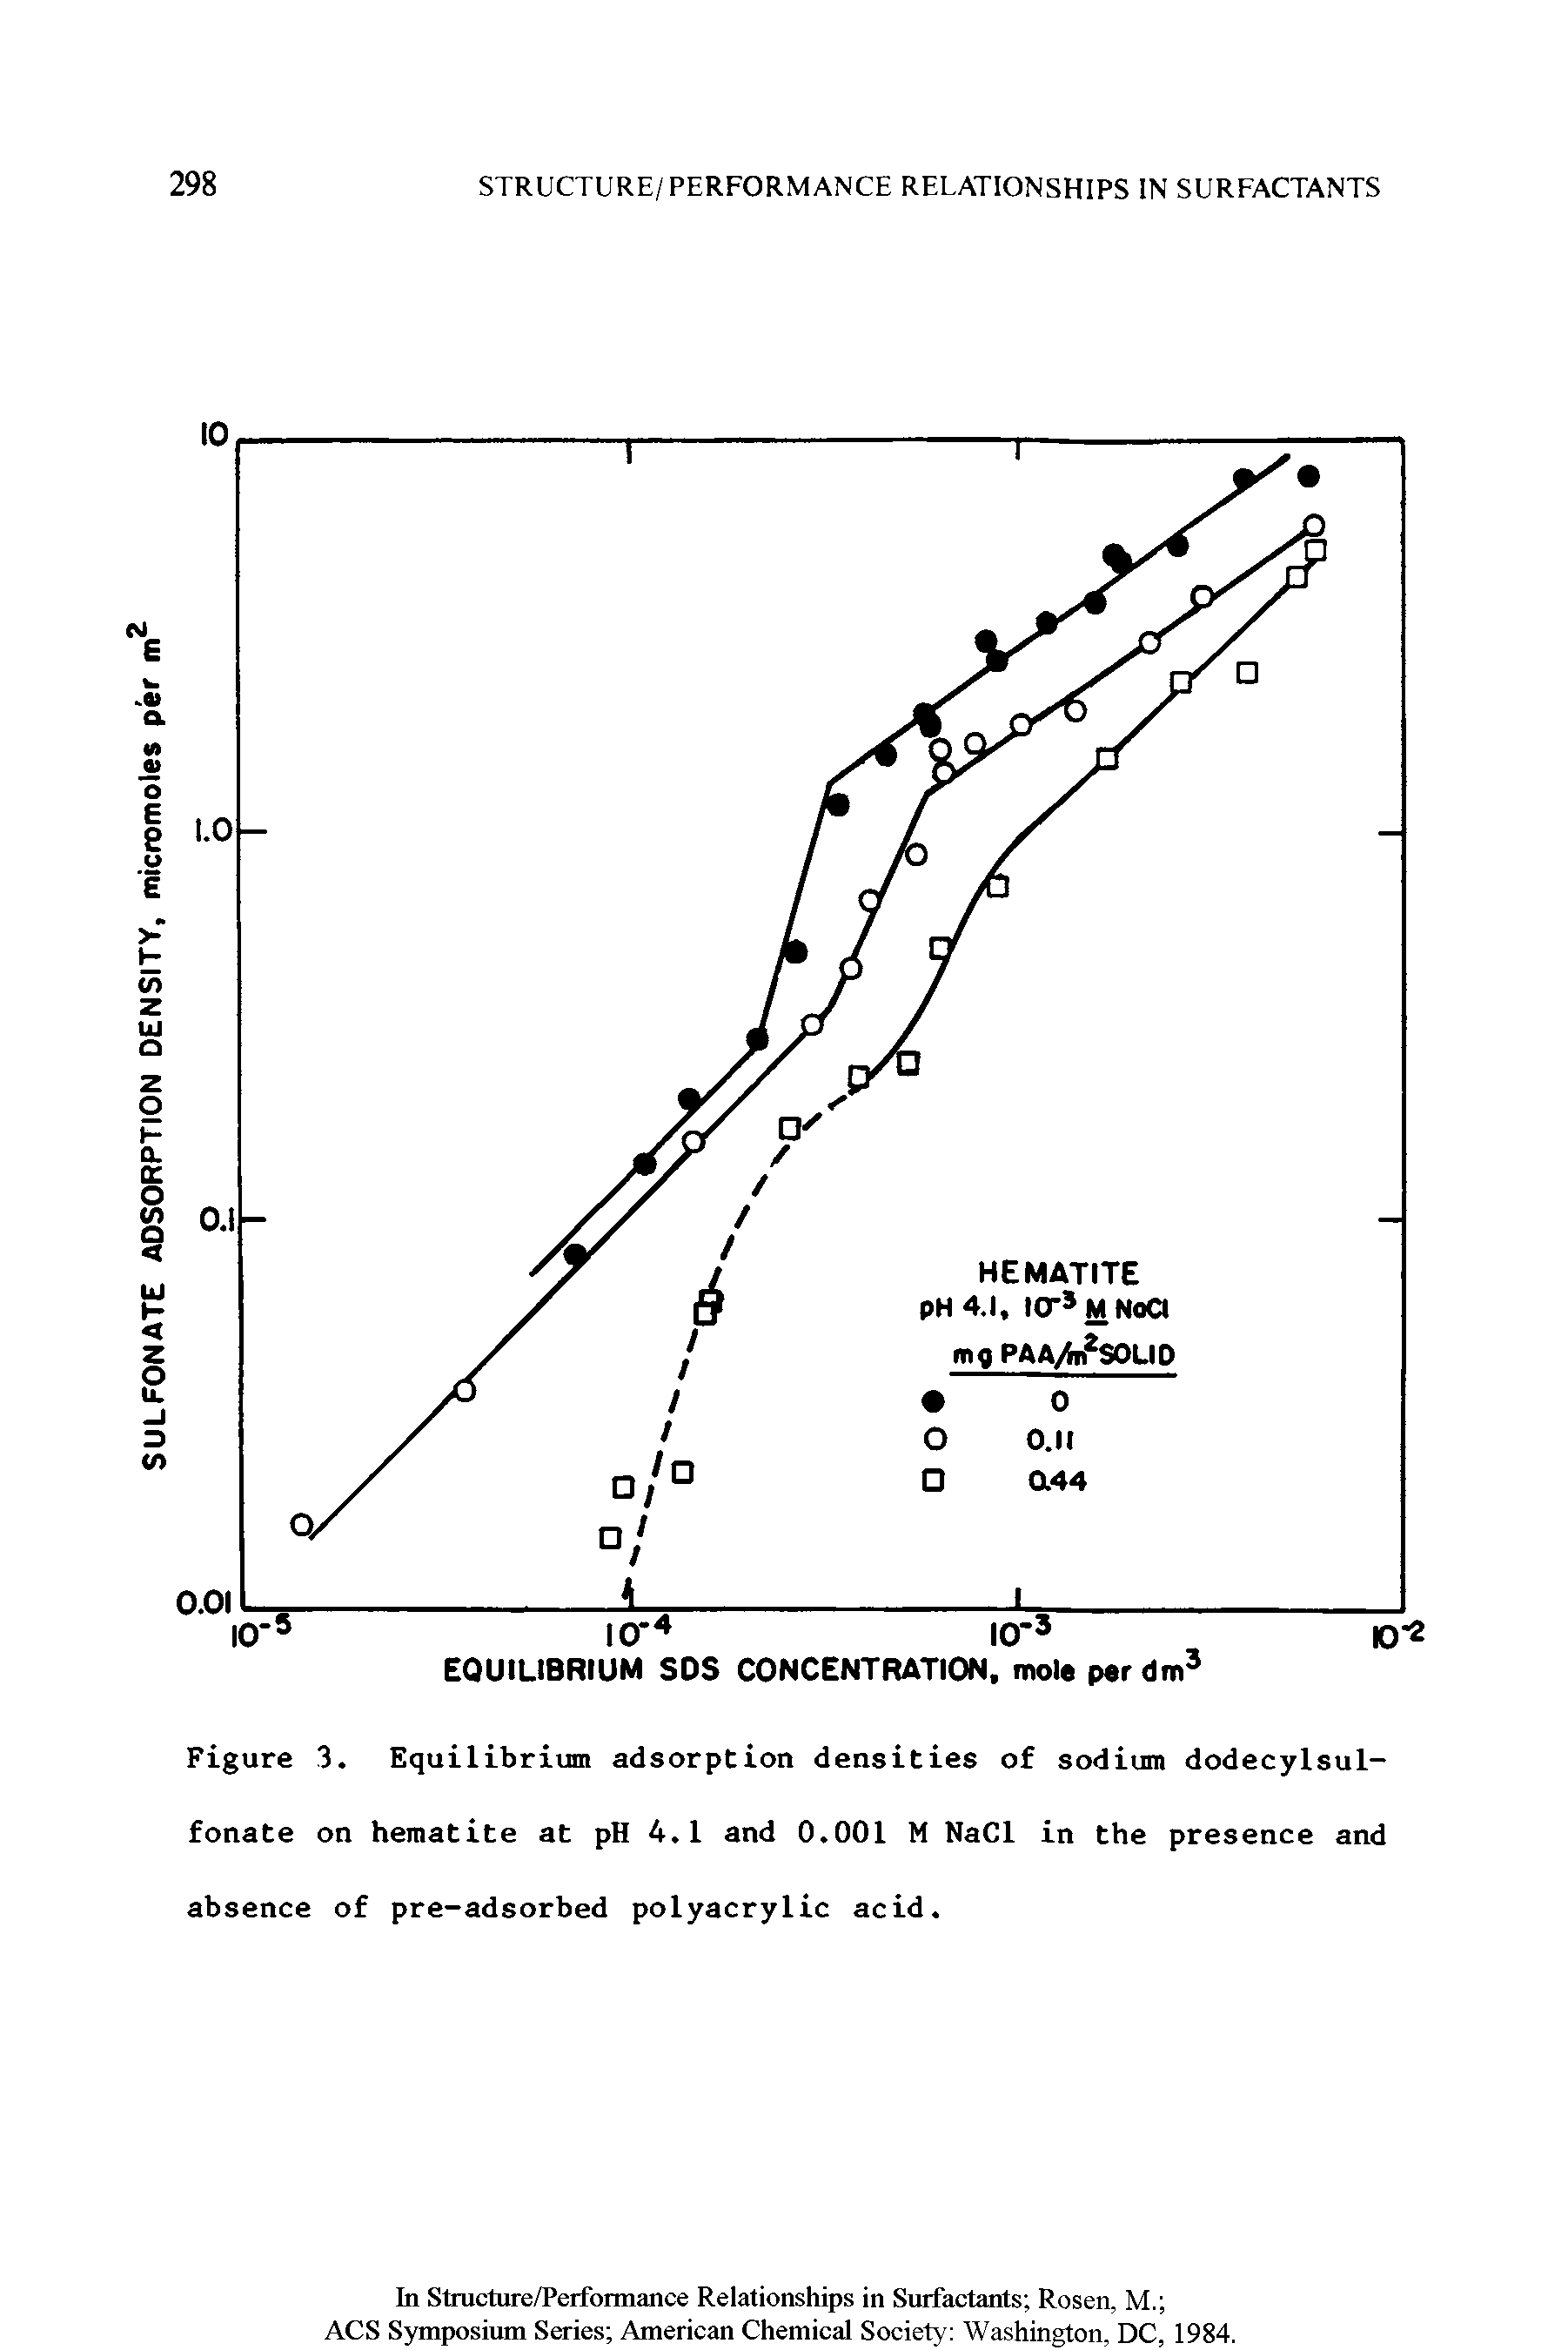 Figure 3. Equilibriimi adsorption densities of sodium dodecylsul-fonate on hematite at pH 4.1 and 0.001 M NaCl in the presence and absence of pre-adsorbed polyacrylic acid.